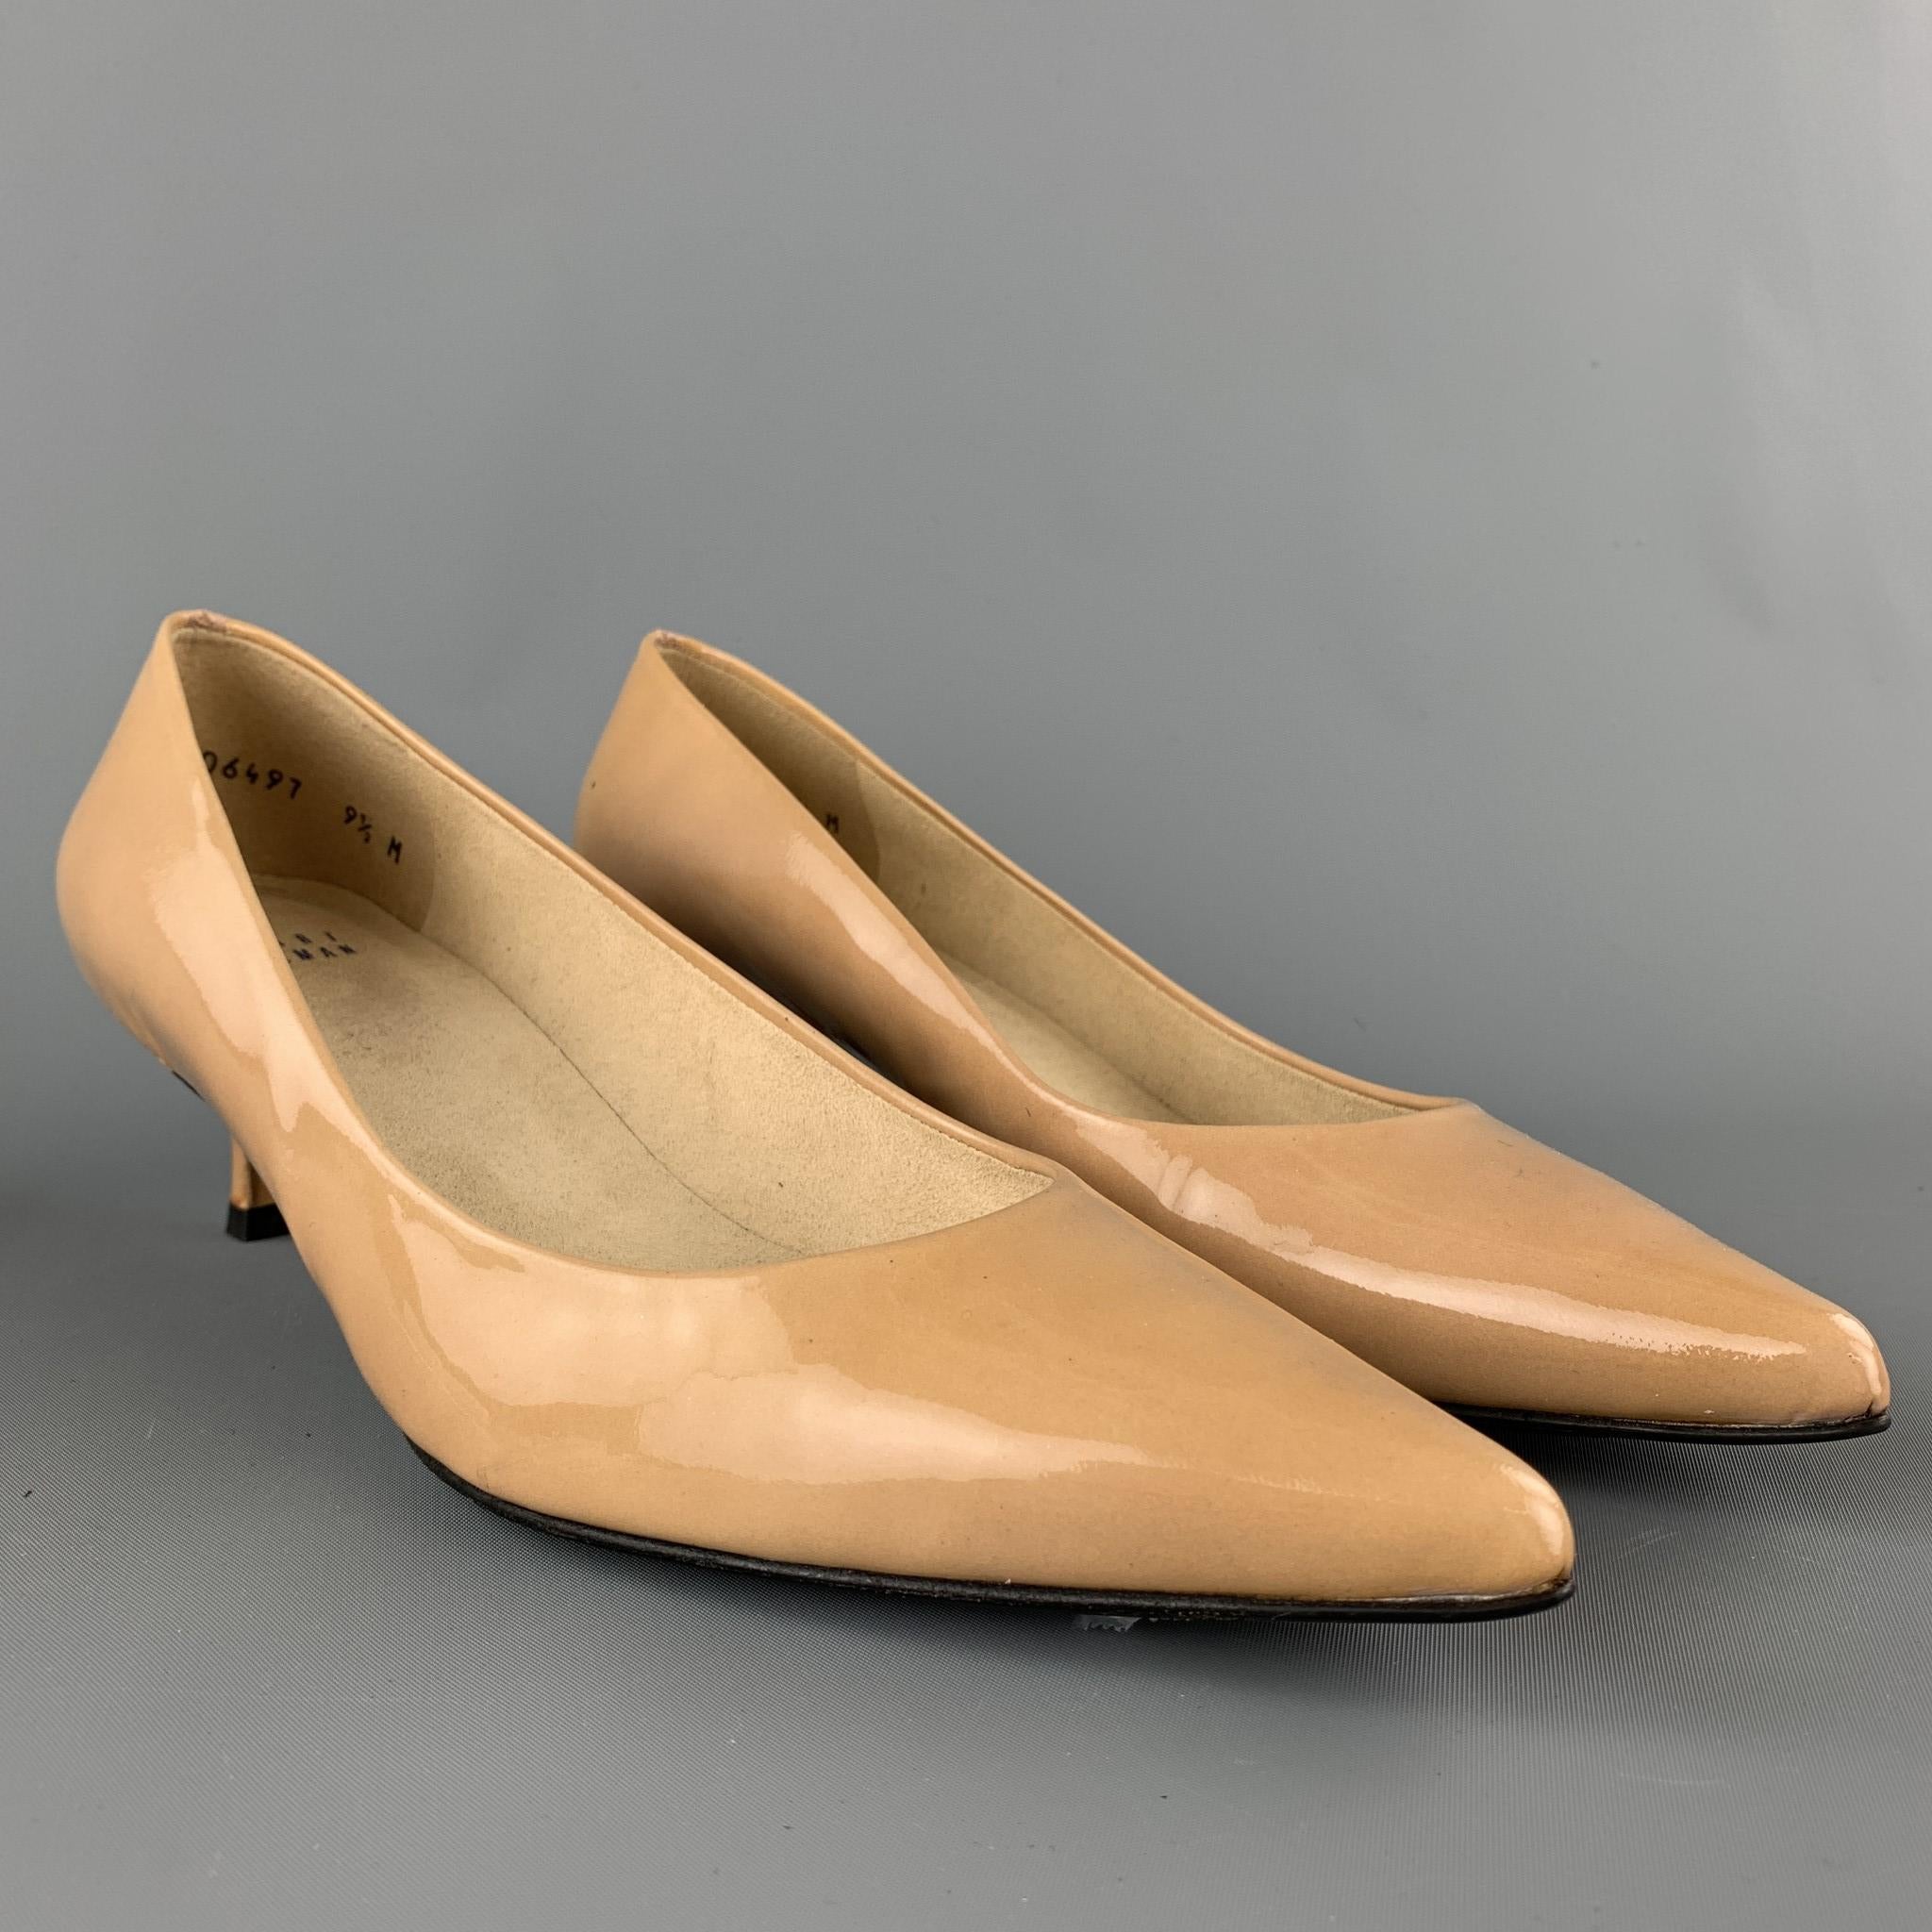 STUART WEITZMAN pumps comes in a beige patent leather featuring a pointed toe and a kitten heel. Comes with box.

Very Good Pre-Owned Condition.
Marked: 9.5 M

Measurements:

Heel: 2 in. 

SKU: 90286
Category: Pumps

More Details
Brand: STUART